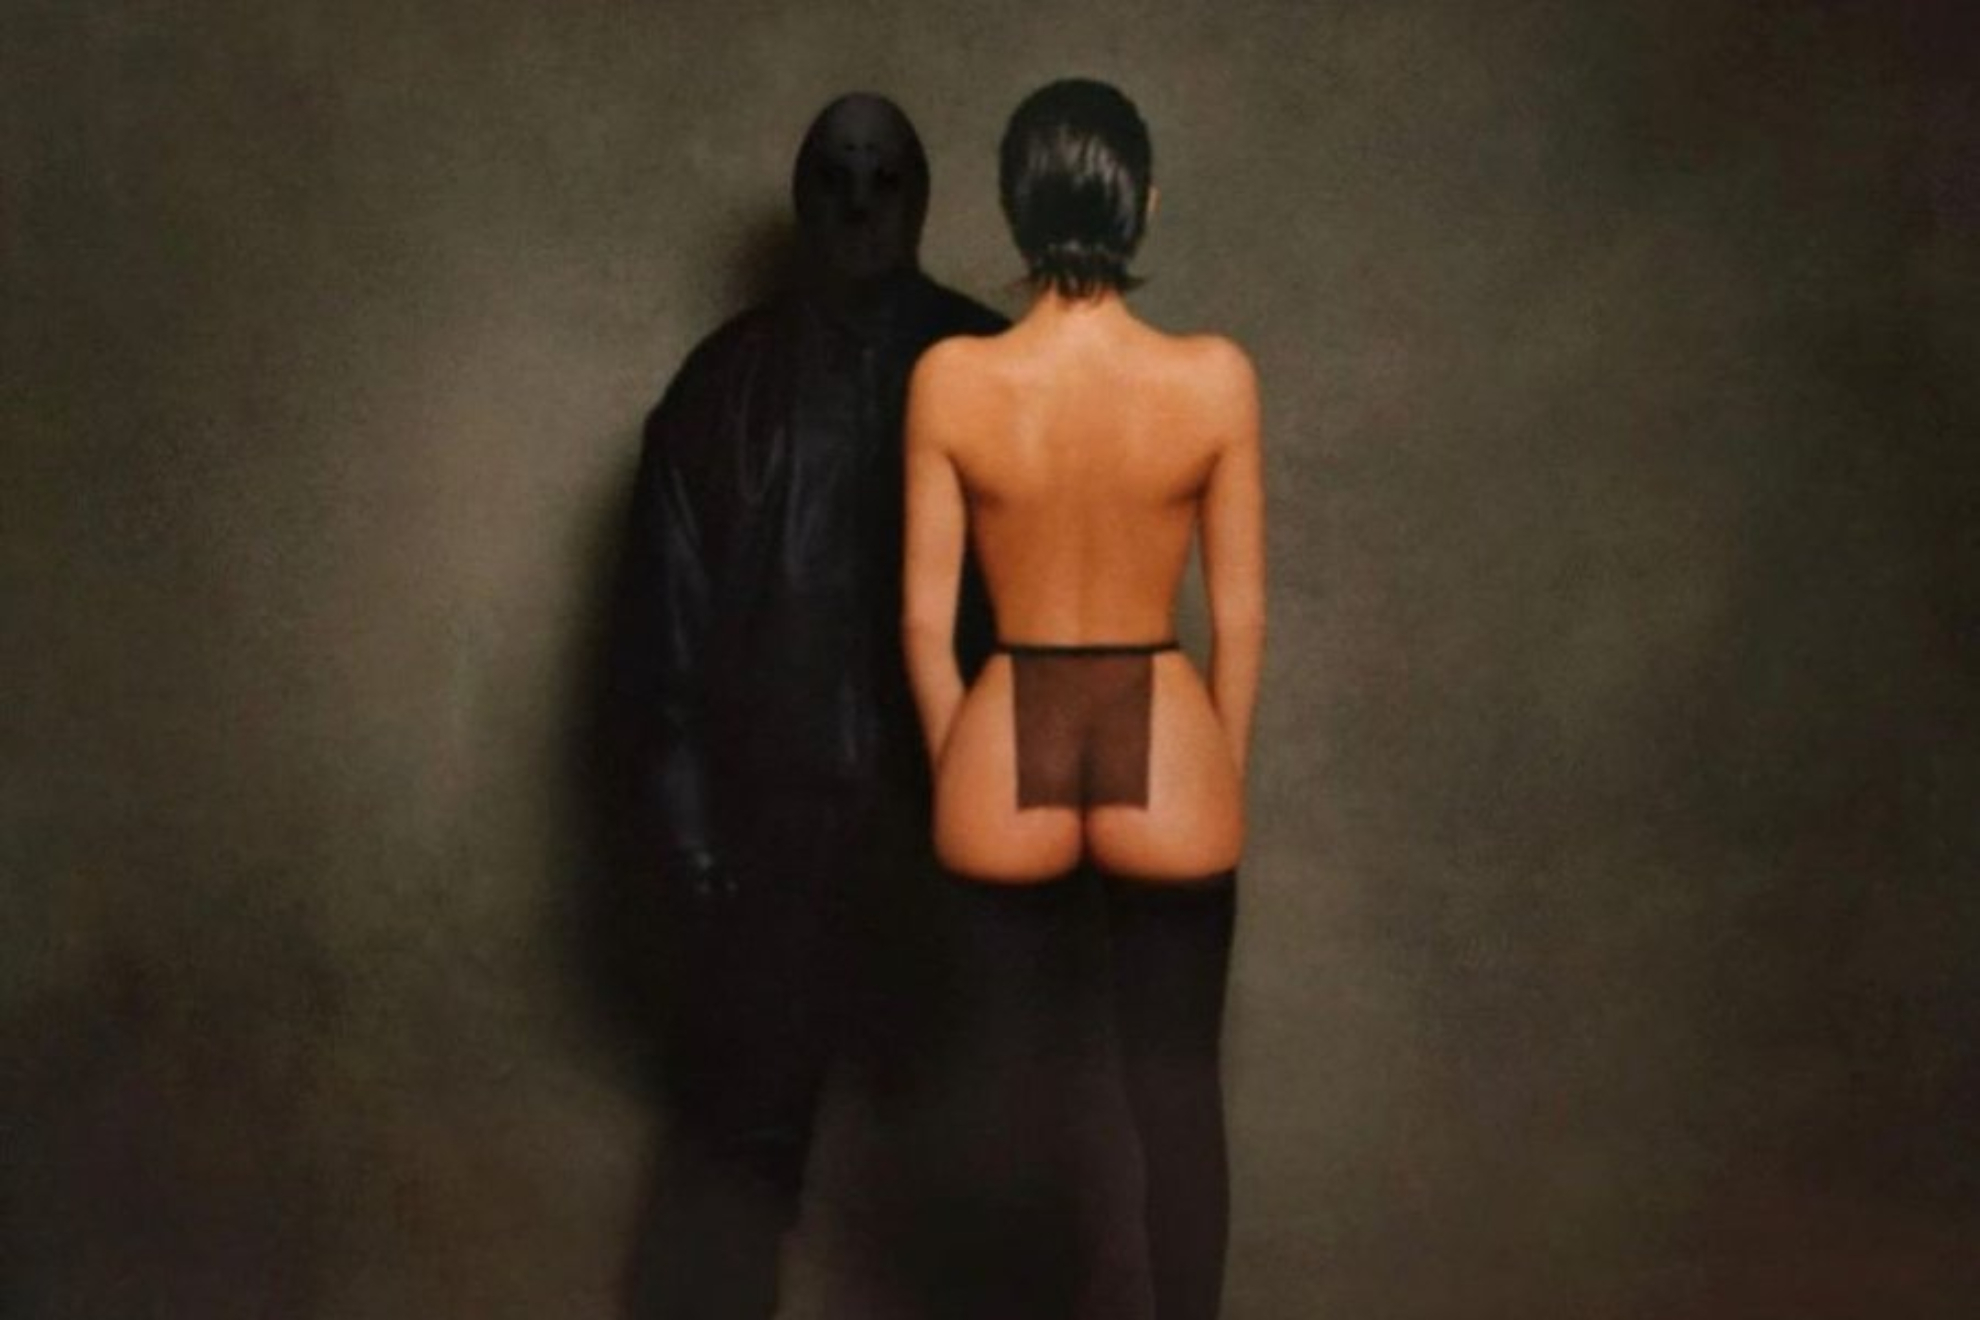 Kanye West and wife Bianca Censori on the VULTURES 1 album cover